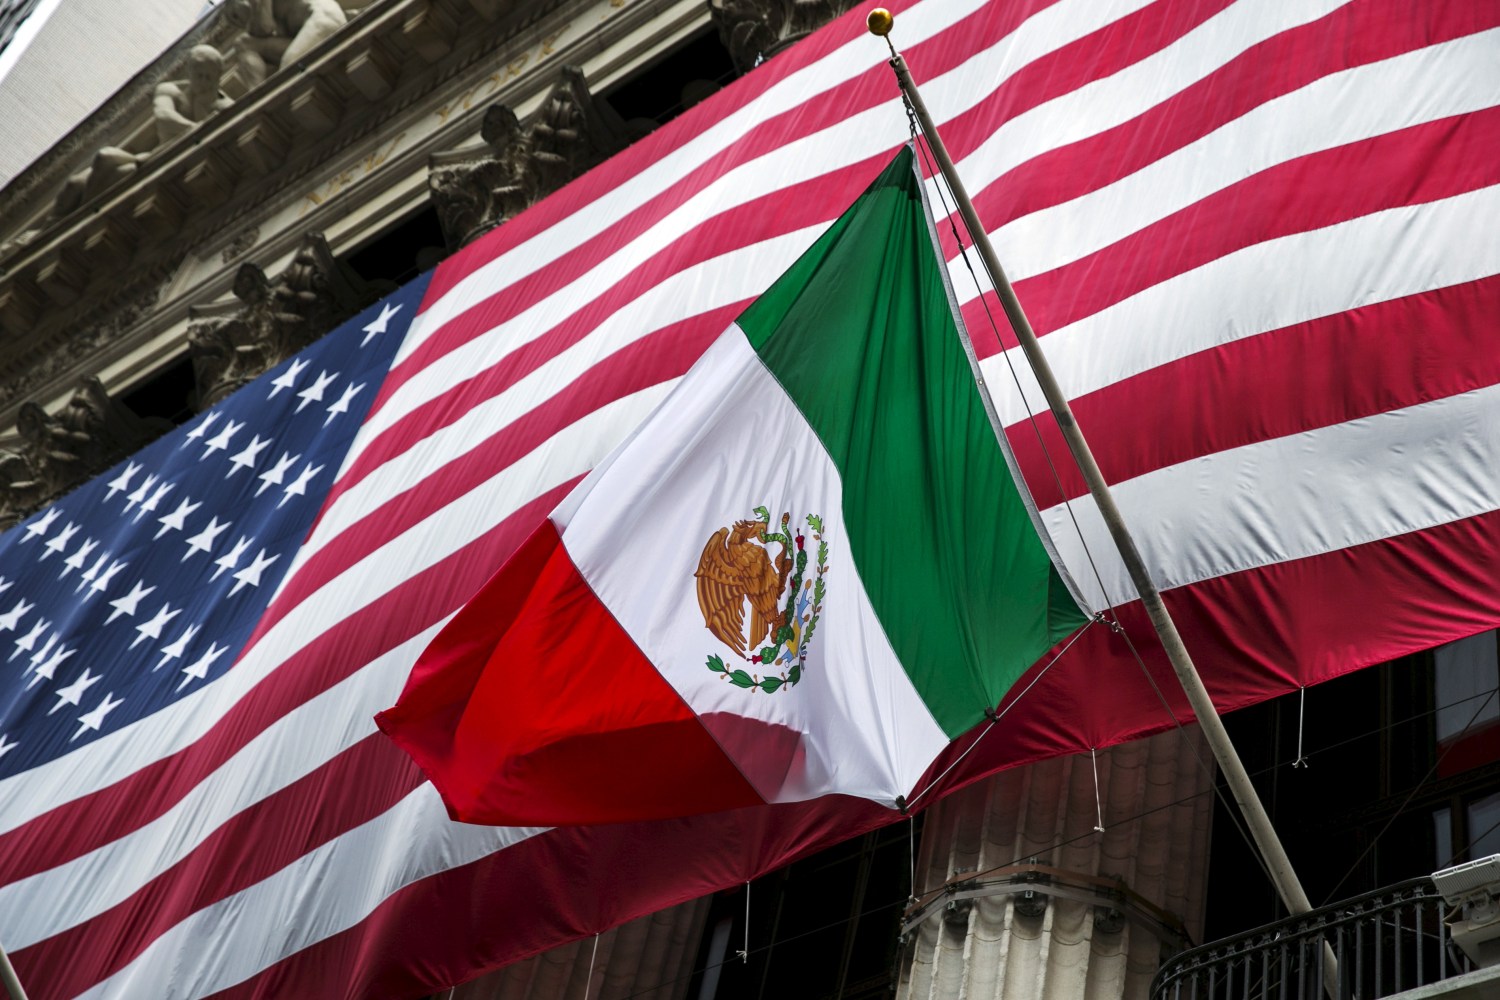 The flag of Mexico changes in front of a large U.S. flag in front of the New York Stock Exchange September 4, 2015. REUTERS/Lucas Jackson - RTX1R4GU